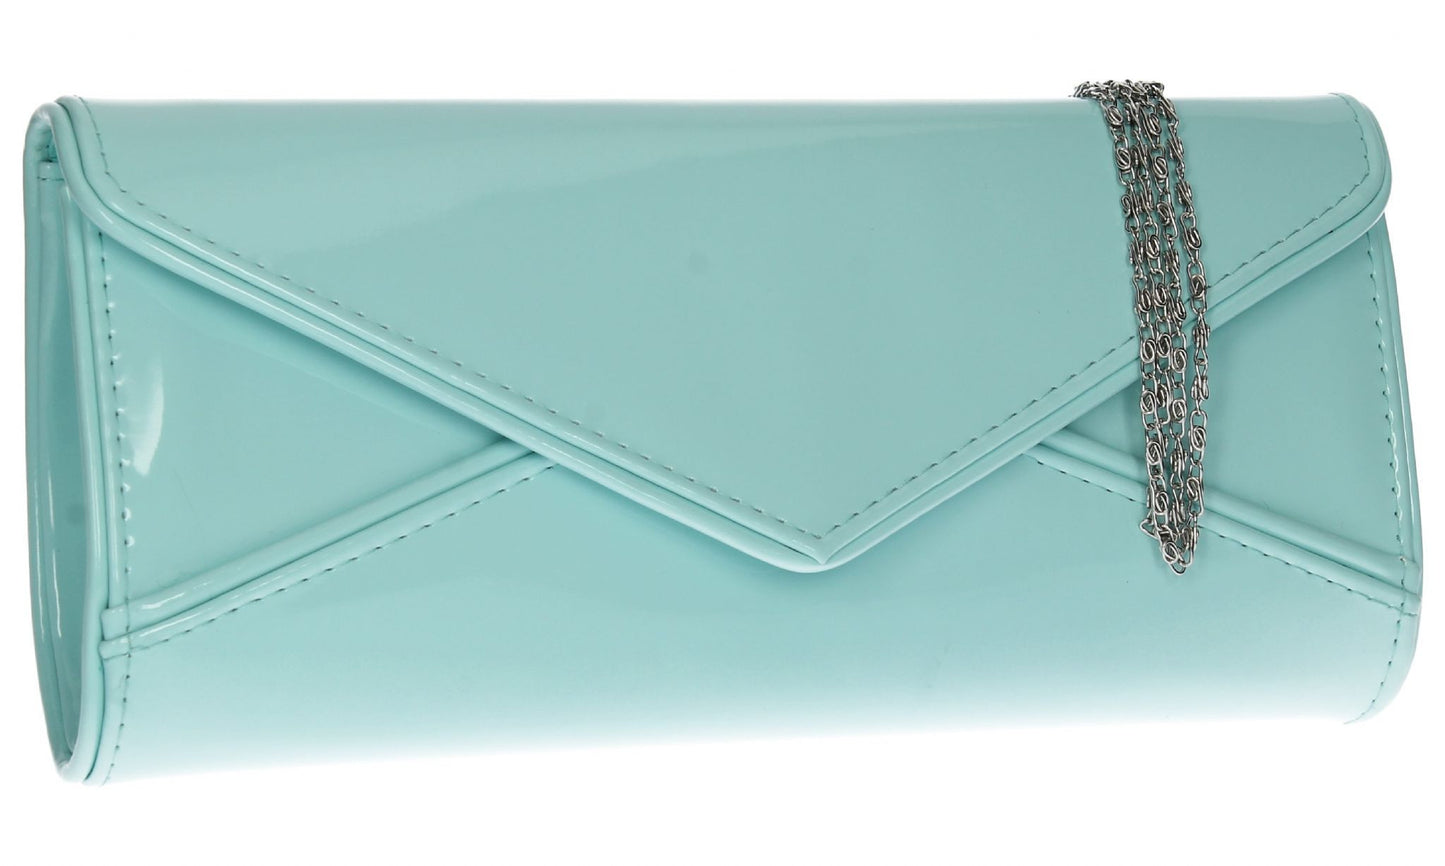 SWANKYSWANS Perry Patent Clutch Bag - Mint Blue Cute Cheap Clutch Bag For Weddings School and Work